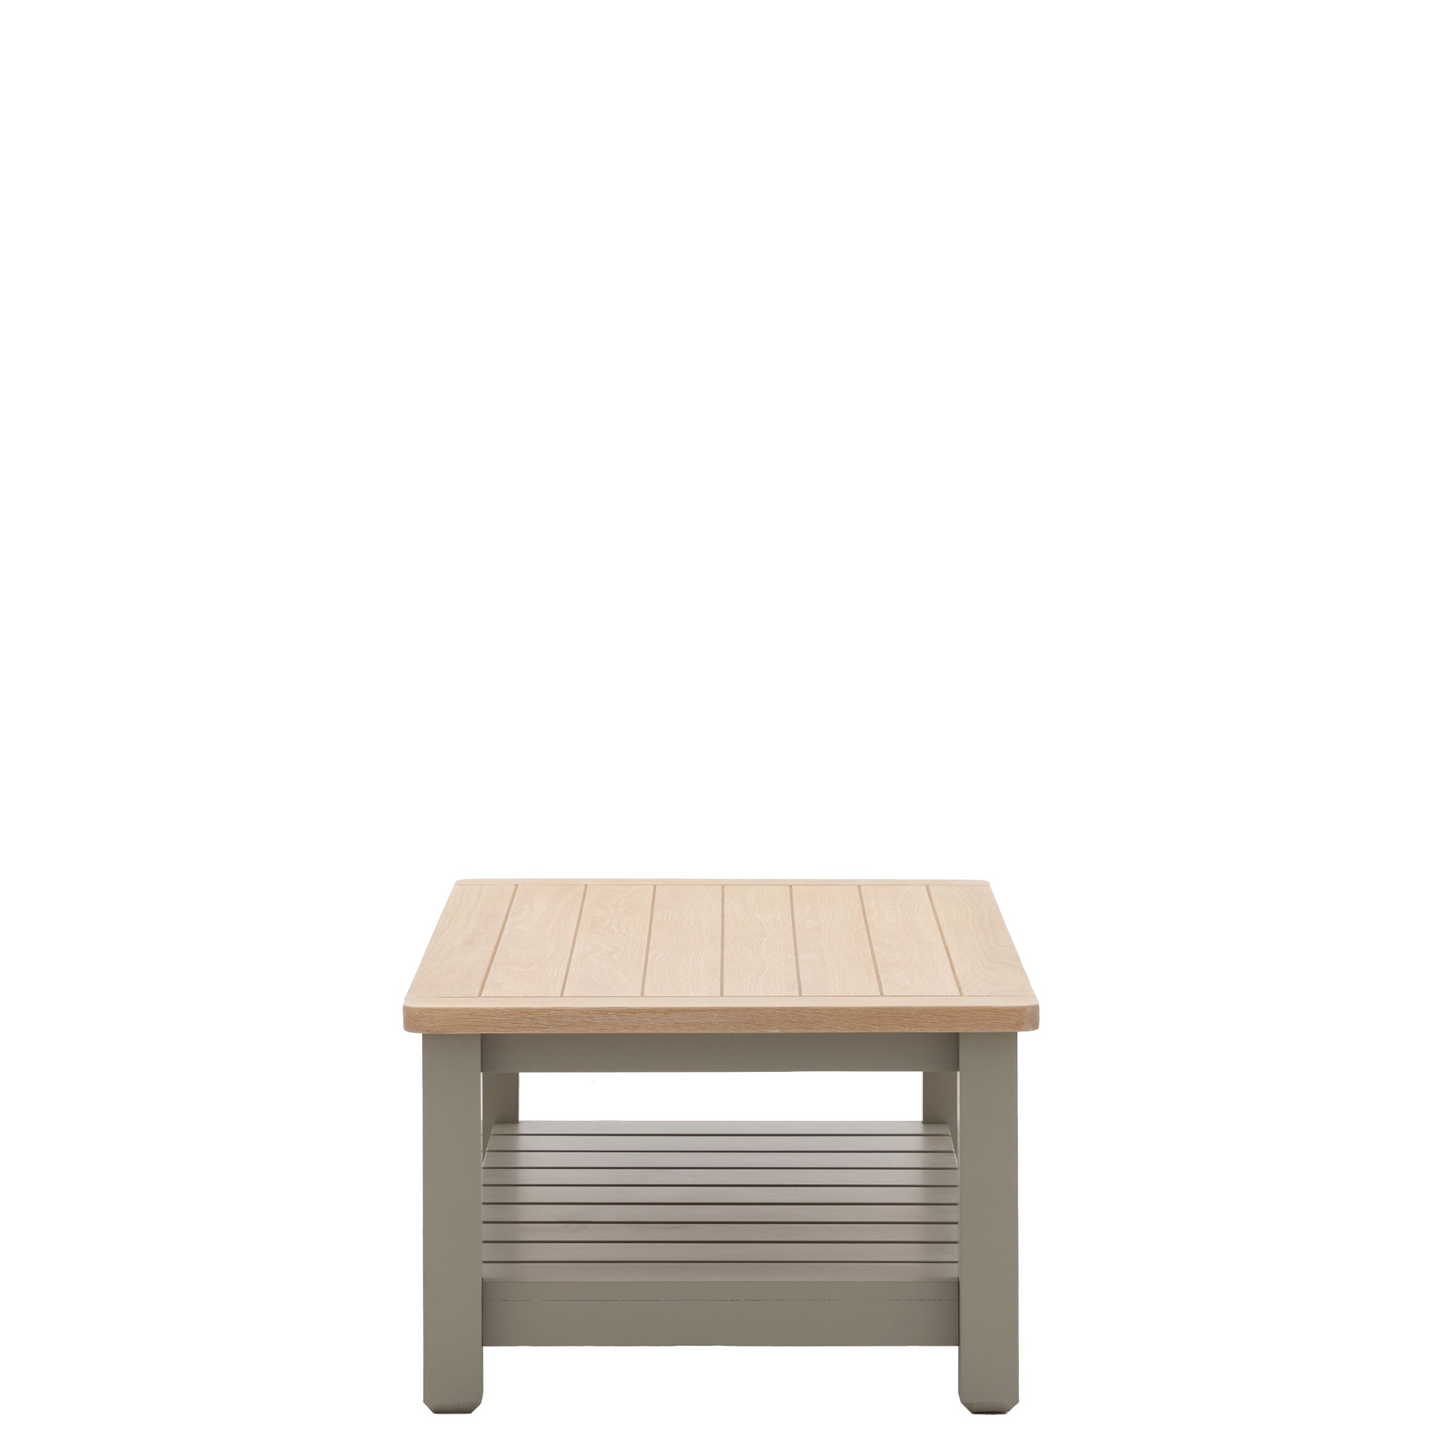 A small Buckland Coffee Table 1200x600x400mm for home interior decor.